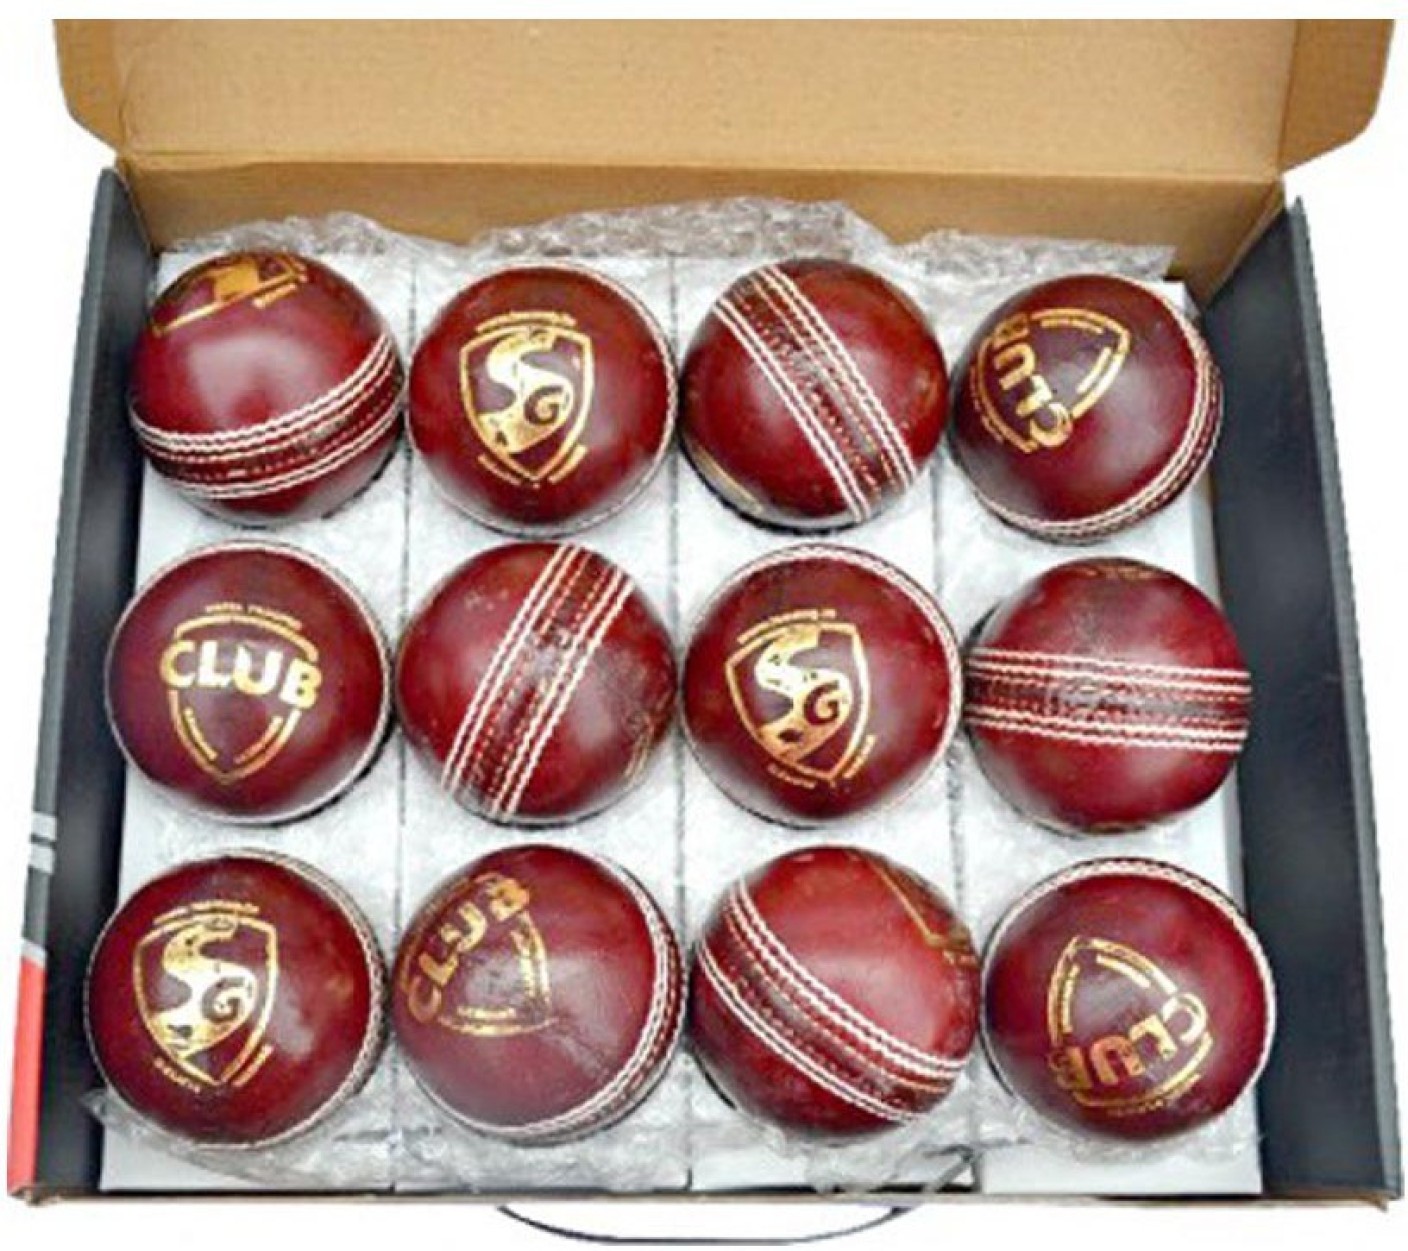 buy-sg-club-cricket-ball-size-5-diameter-2-5-cm-pack-of-12-red